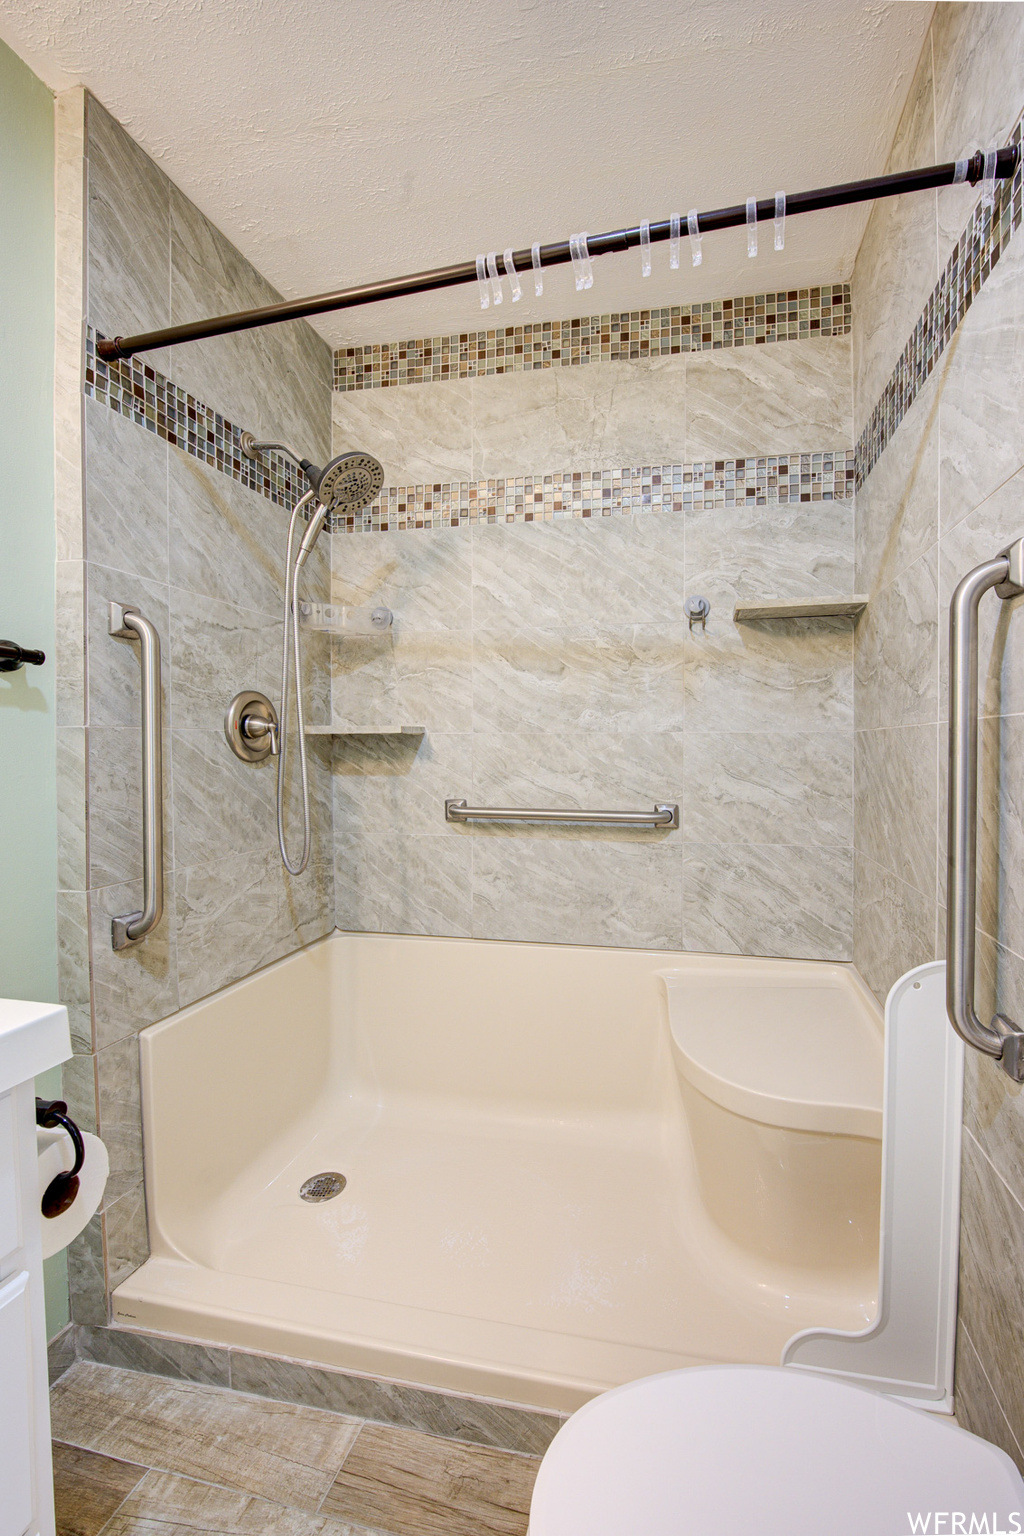 Bathroom with vanity, a textured ceiling, toilet, and a tile shower